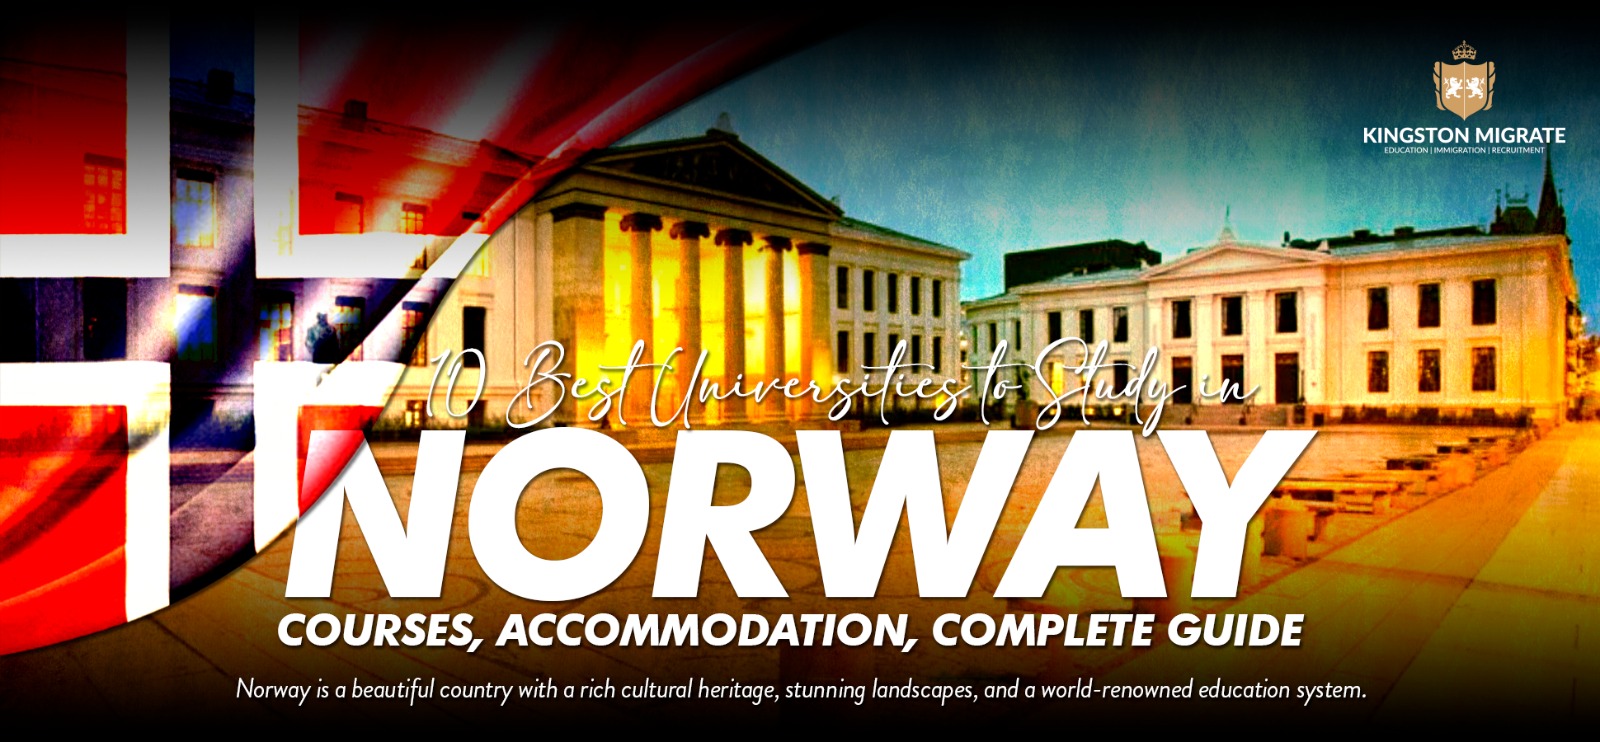 10 Best Universities to Study in Norway, Courses, Accommodation, Complete Guide